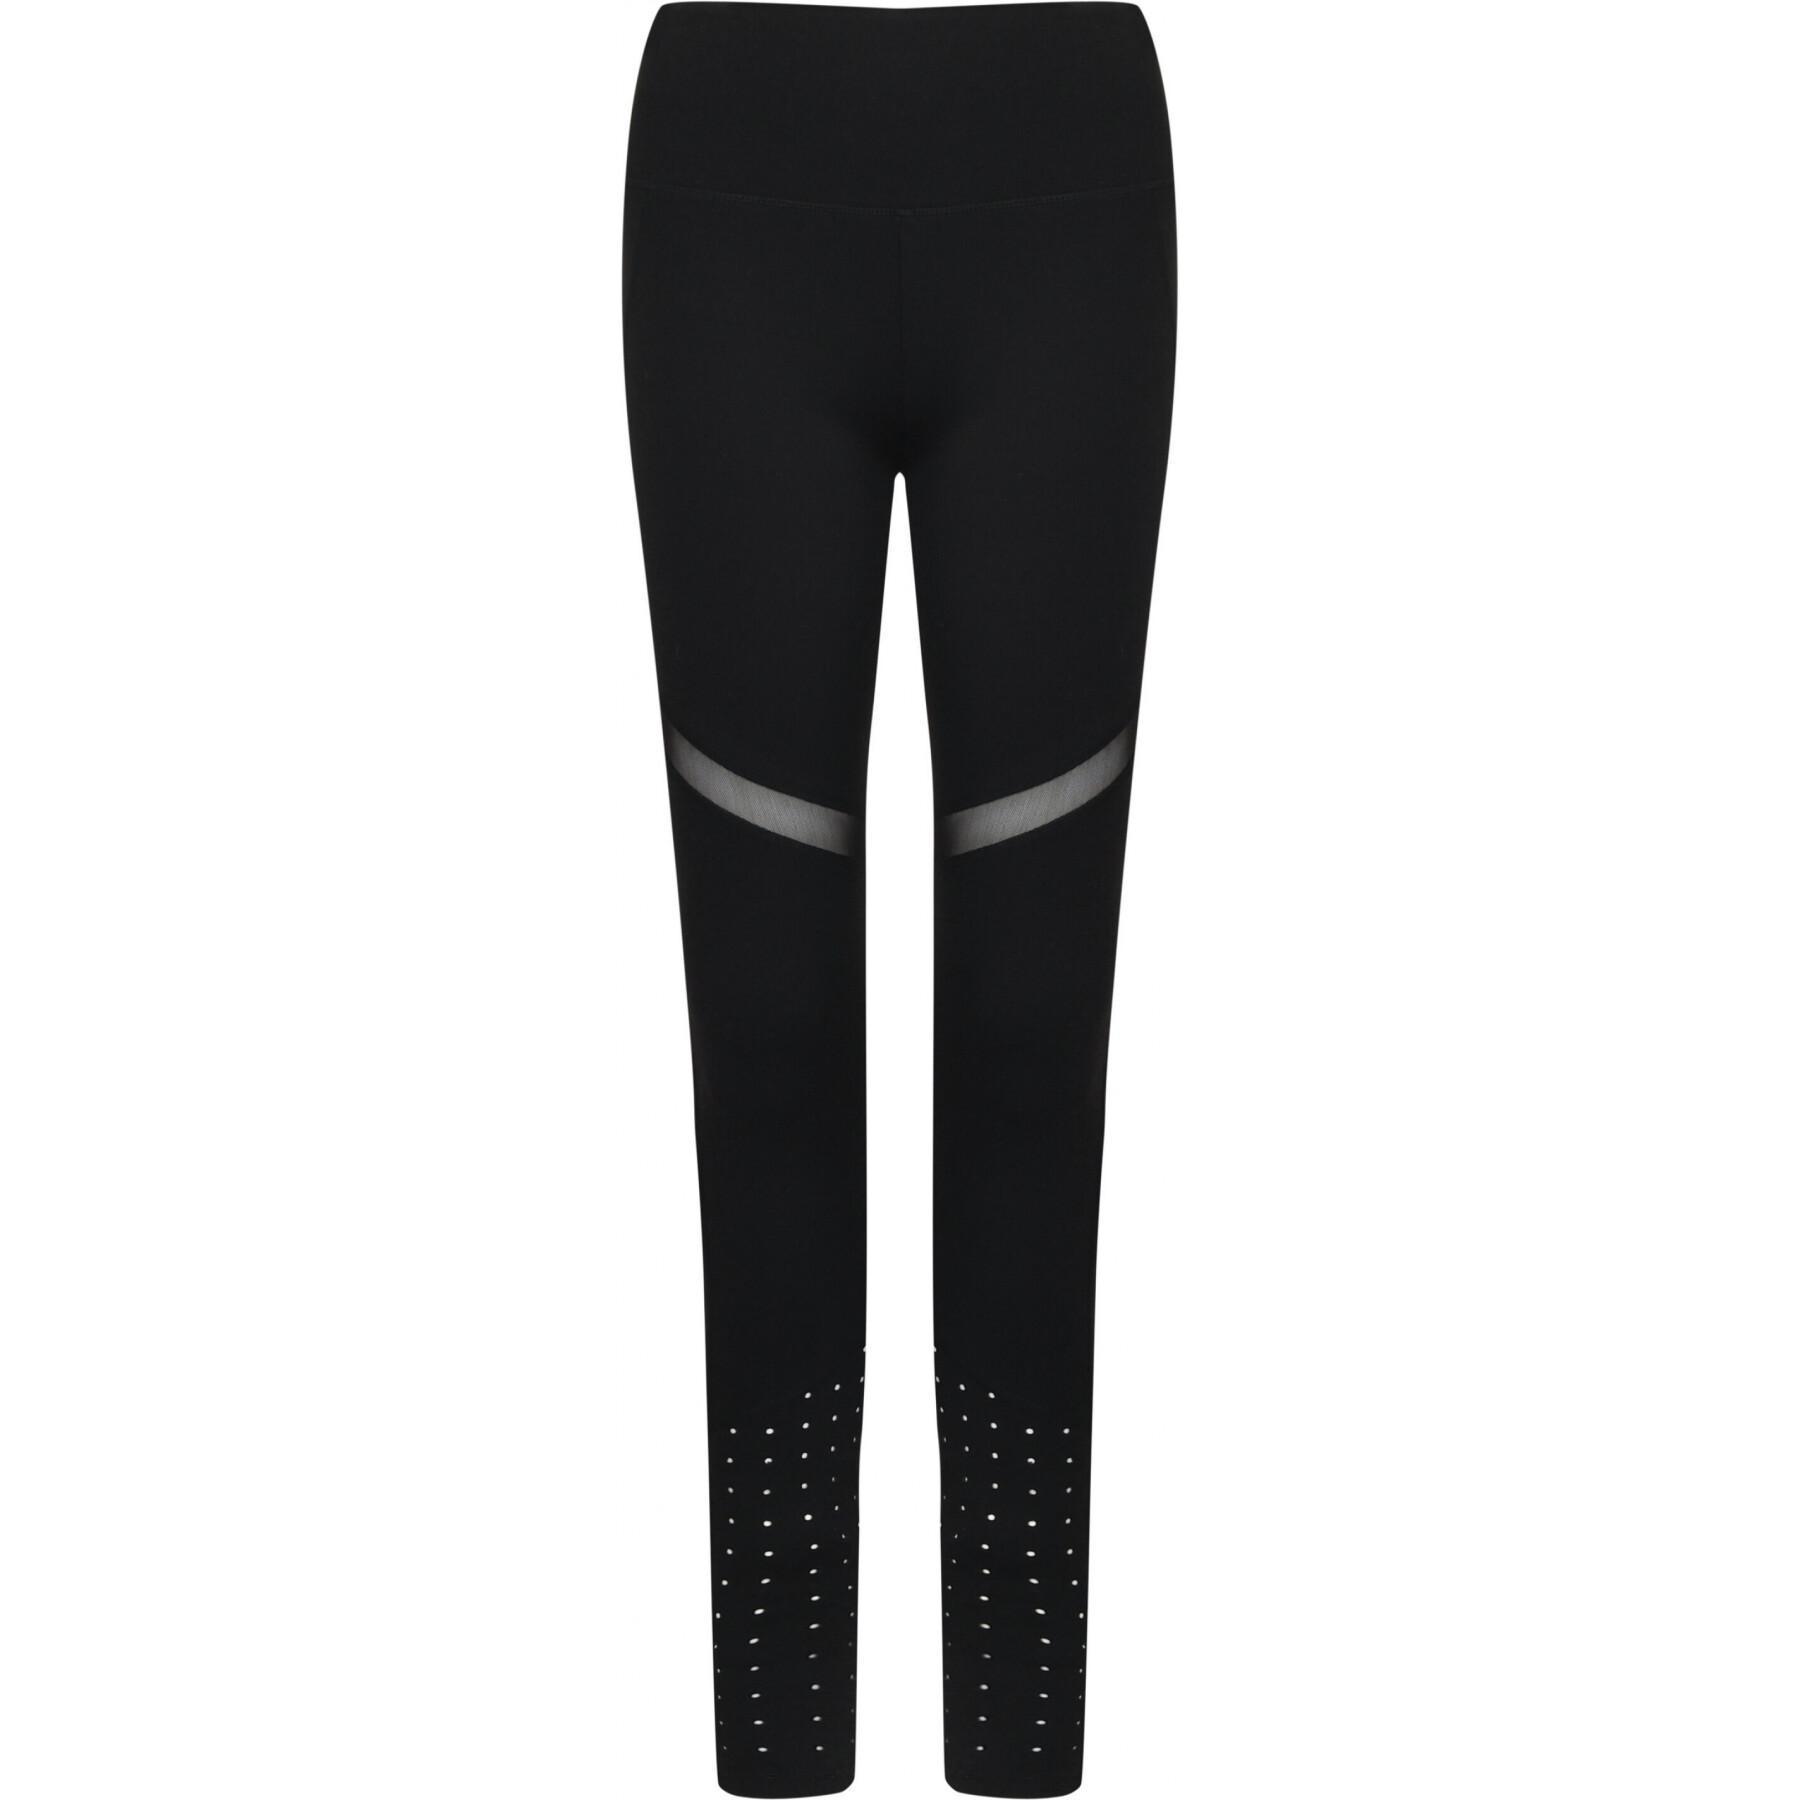 Legging with women's inserts Tombo